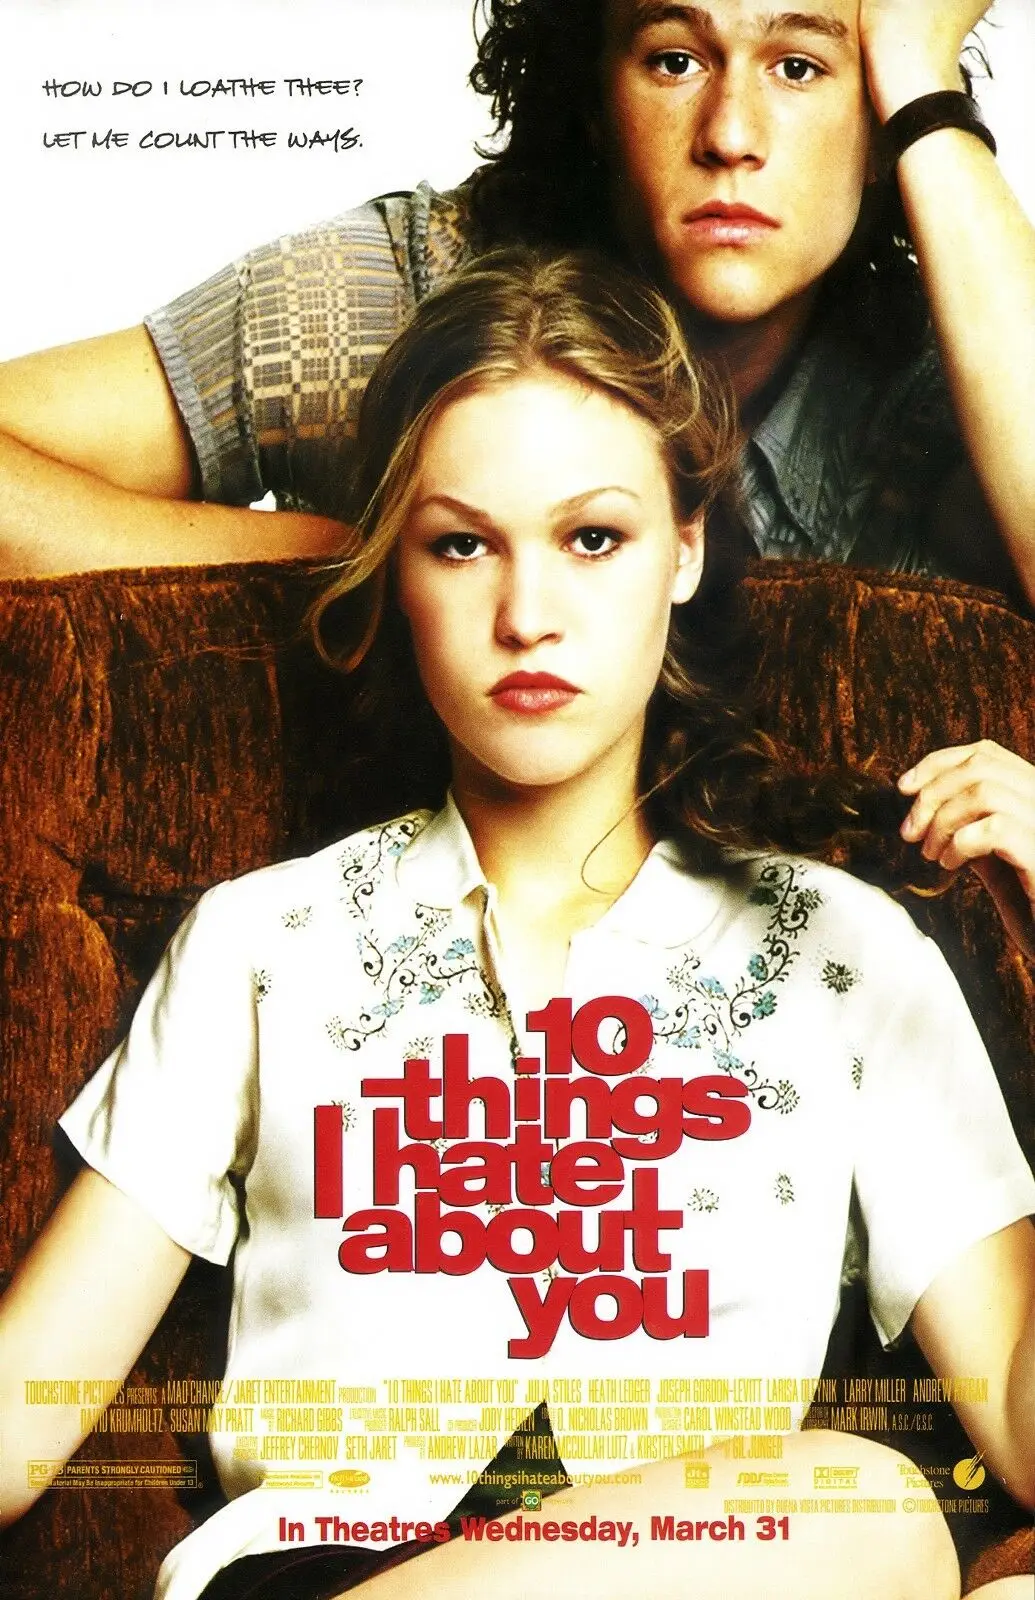 

10 Things I Hate About You Movie Art Silk Poster Print 24x36inch